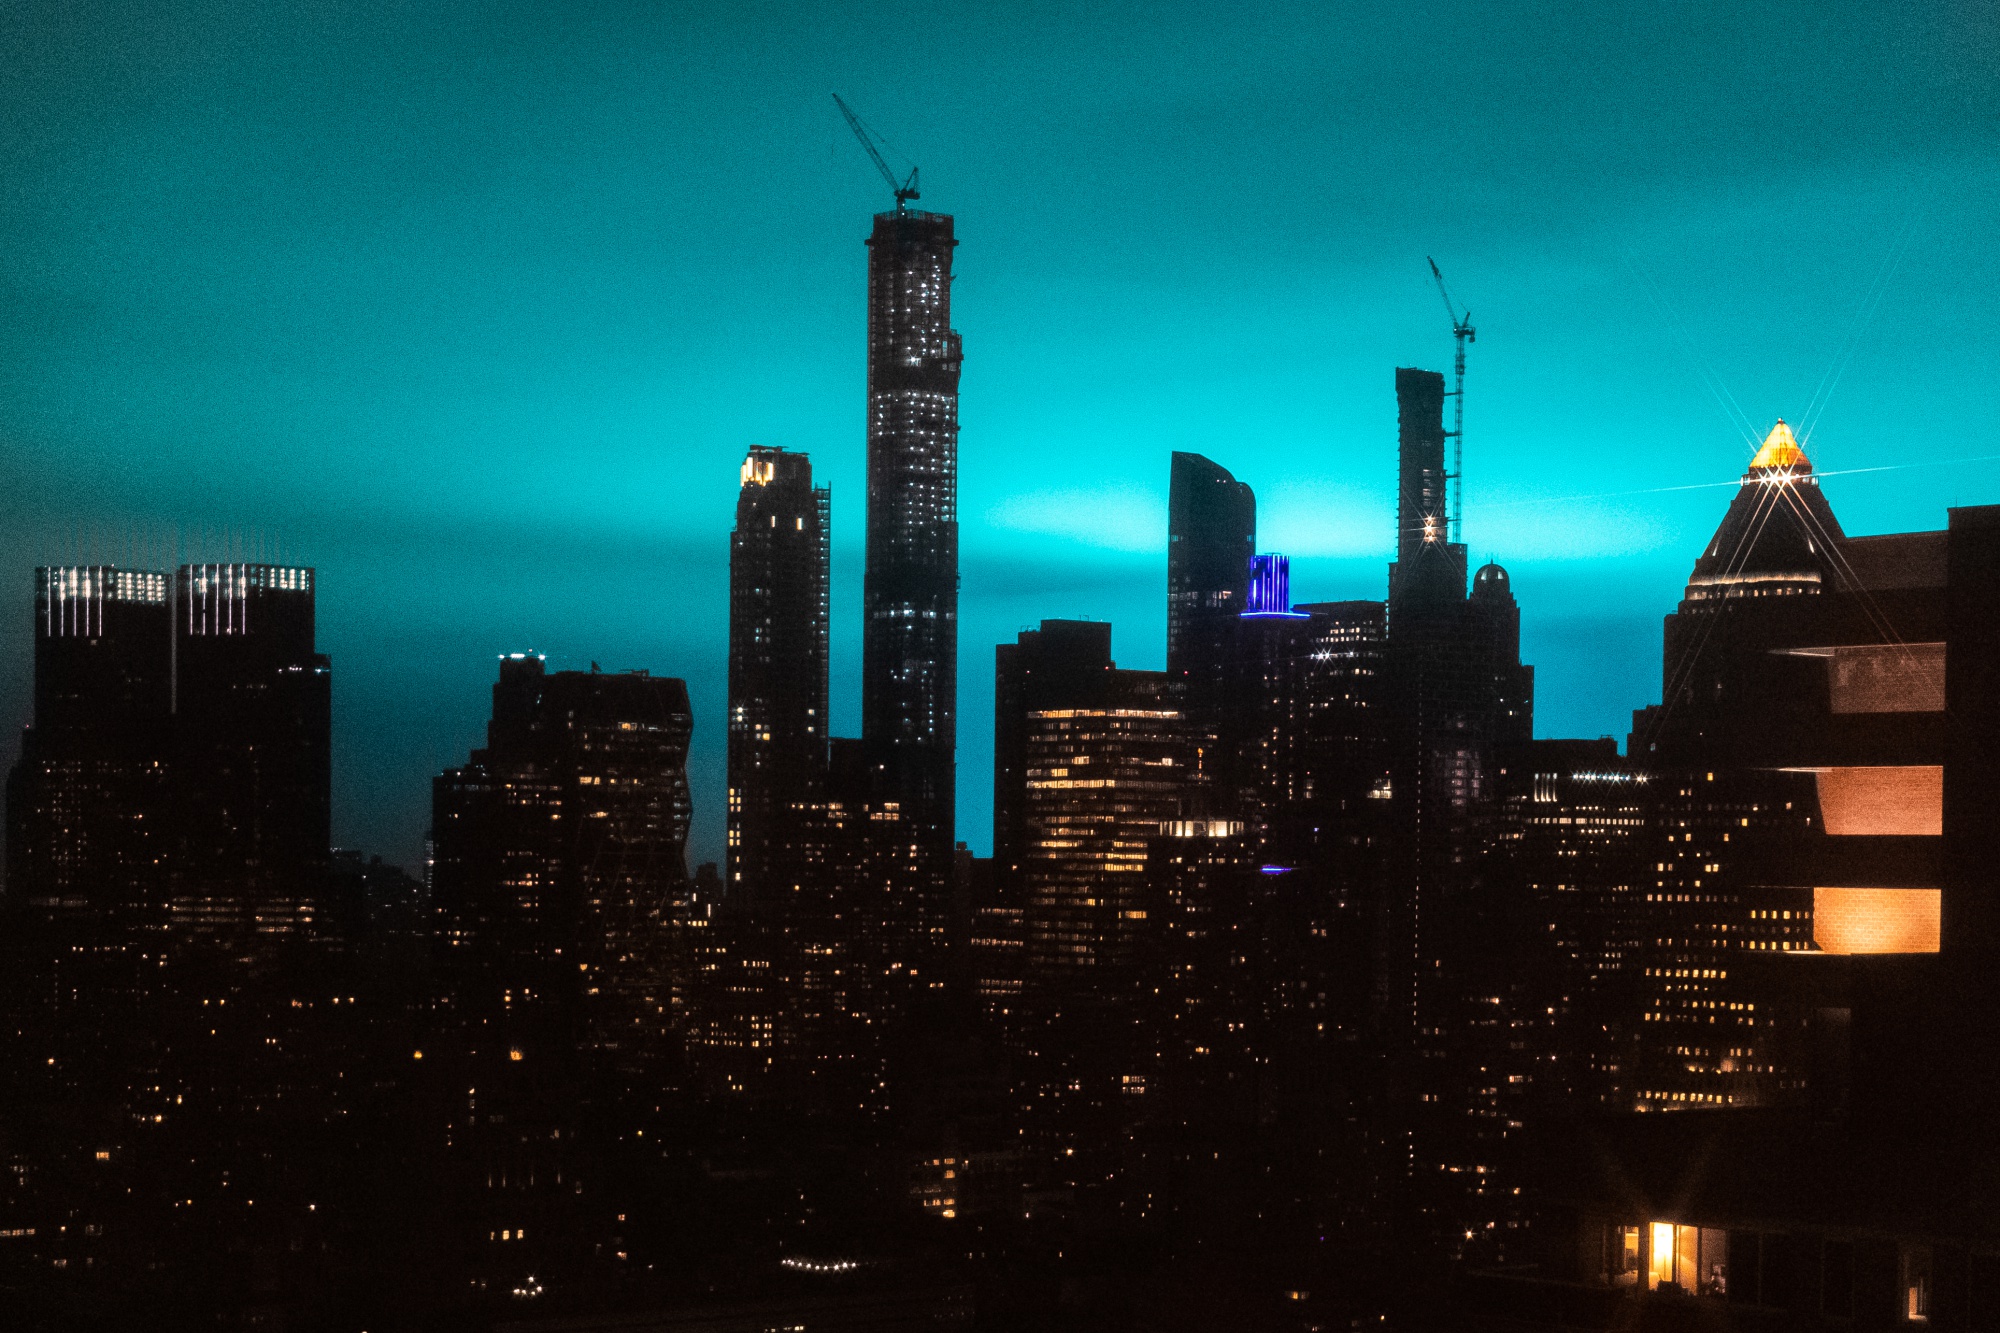 Why a Substation Fire Turned New York City's Sky Bright Blue - Bloomberg